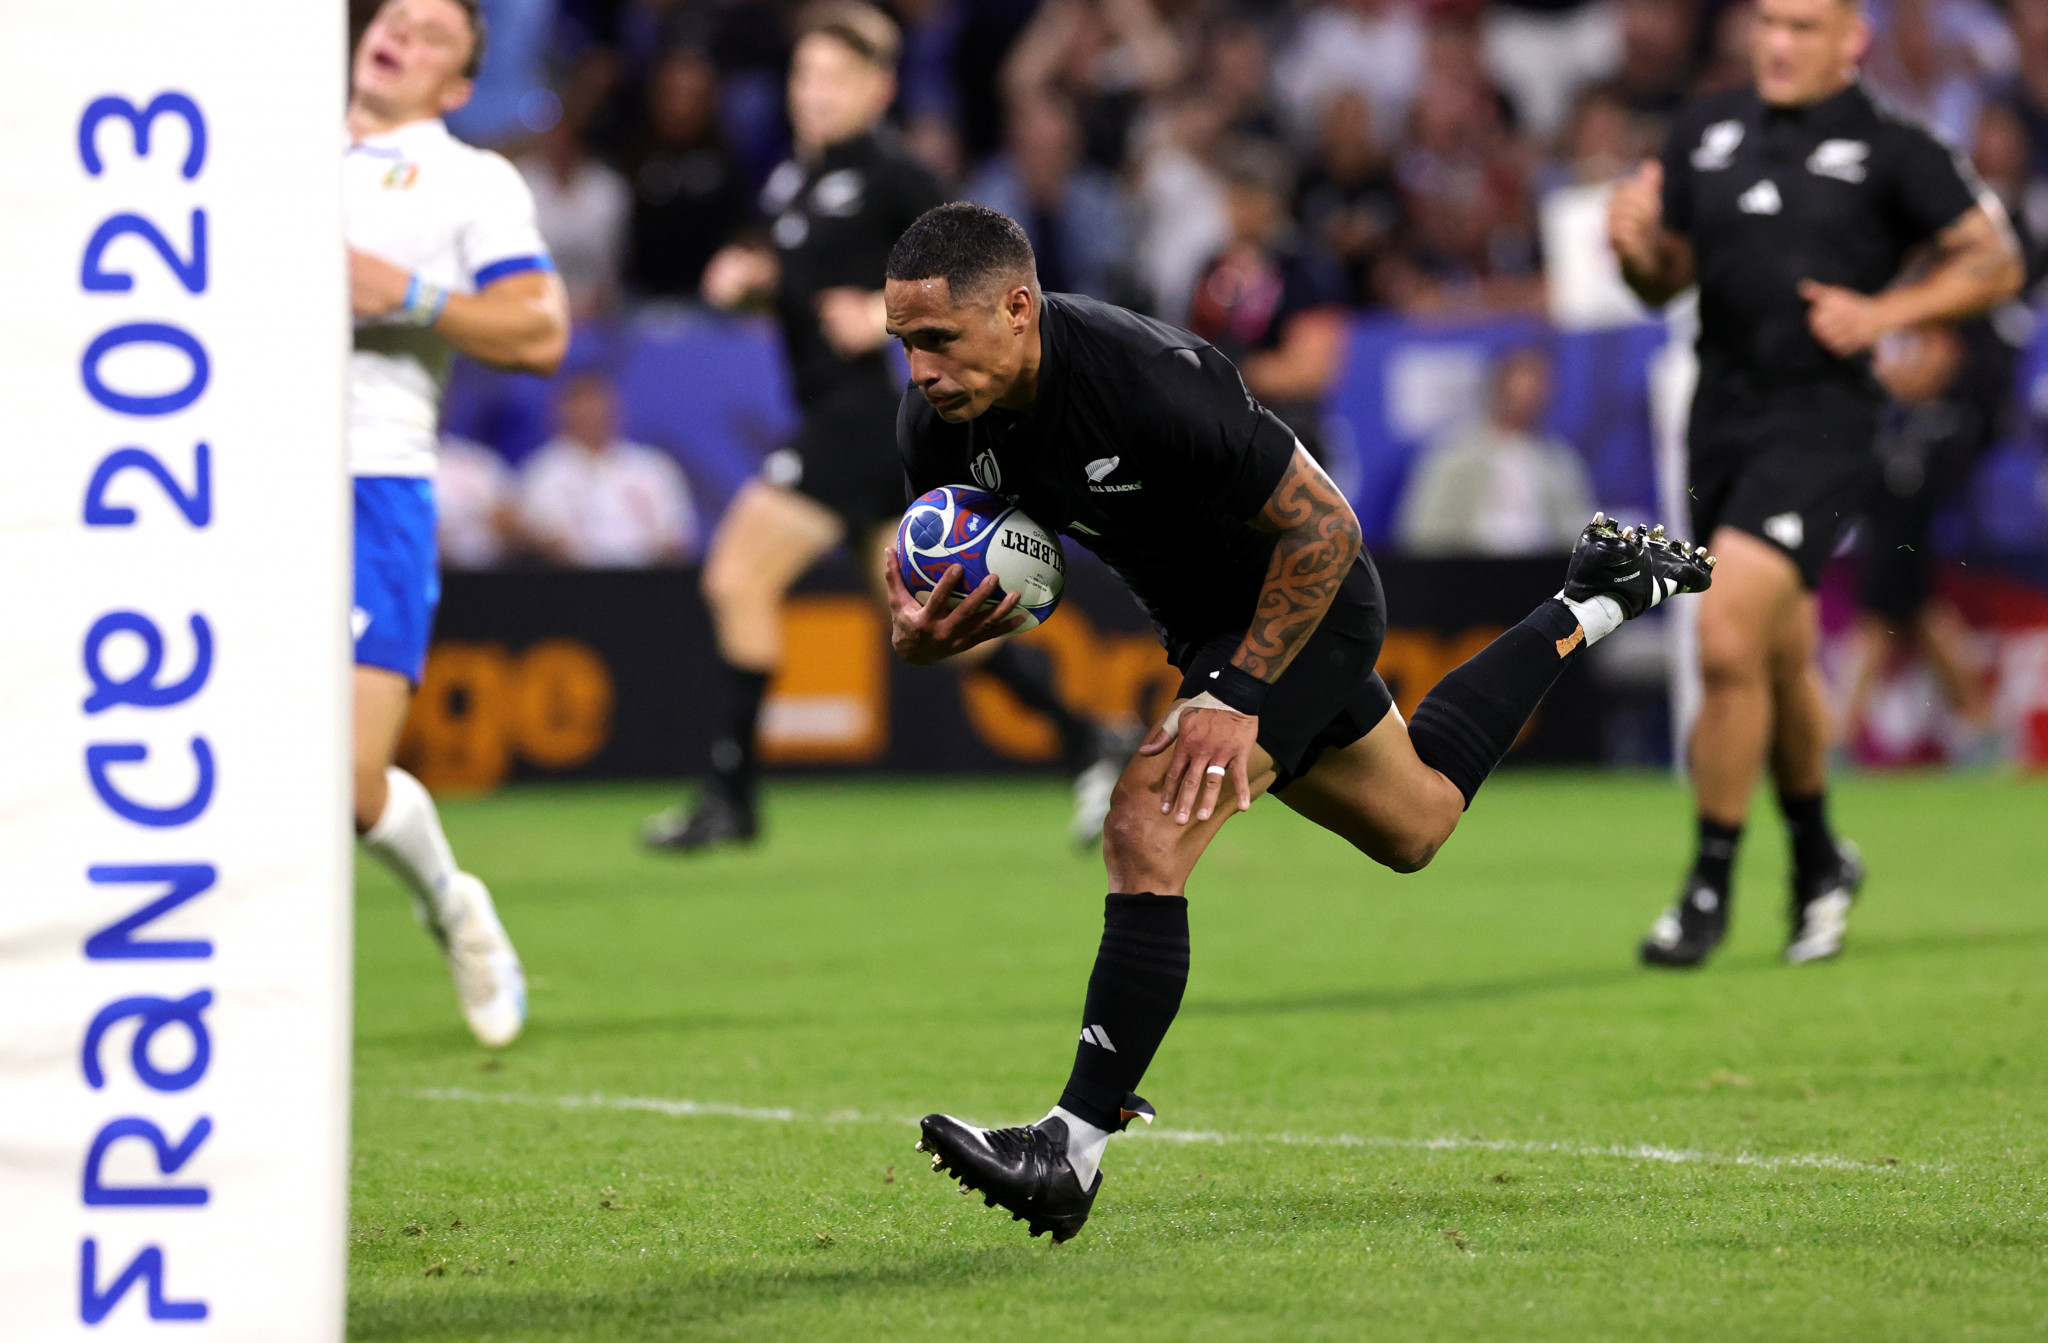 New Zealand overpower Italy with 14 tries at Rugby World Cup